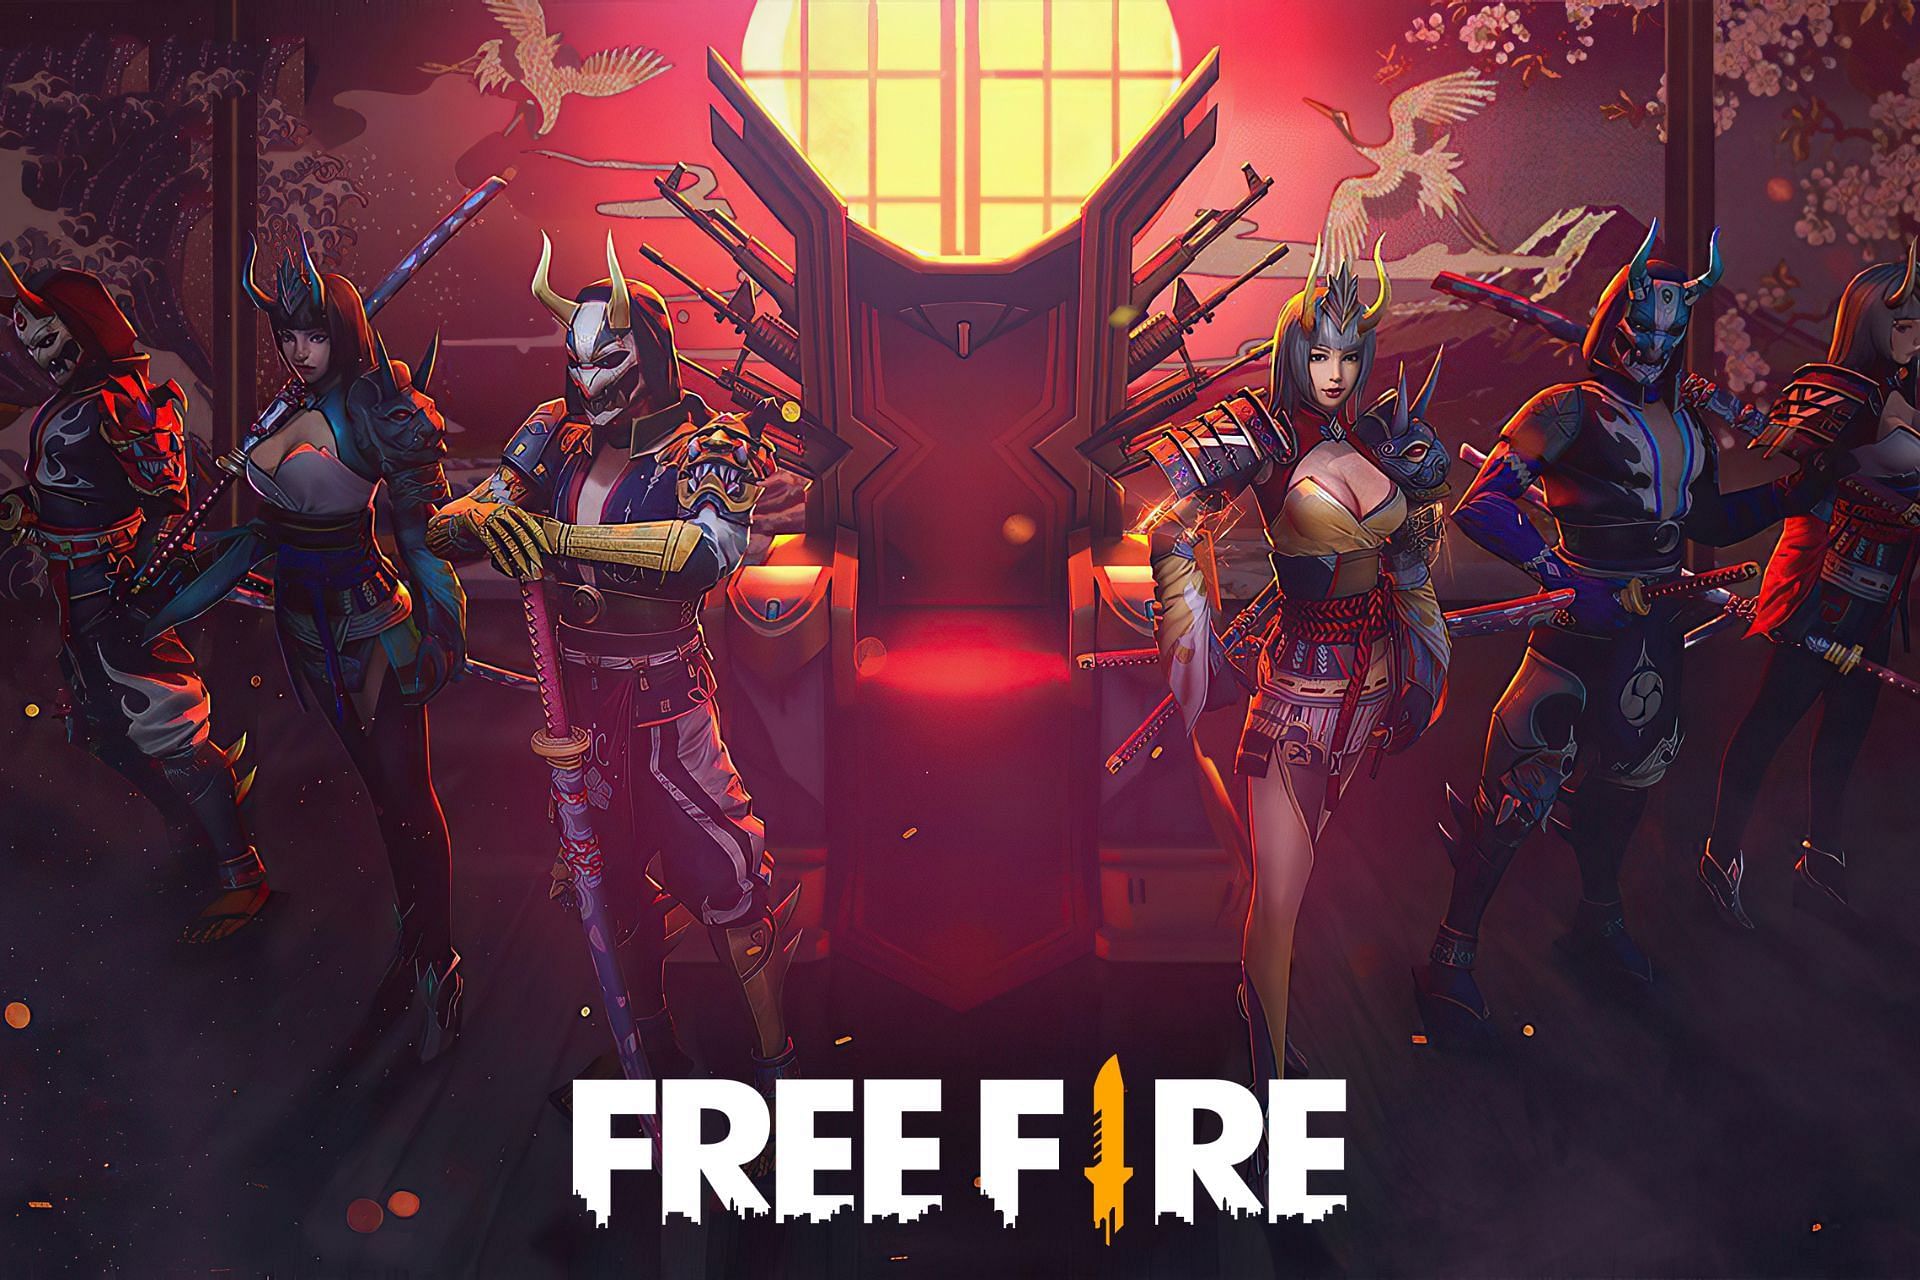 Complete! This is How to Block the Free Fire Game on HP